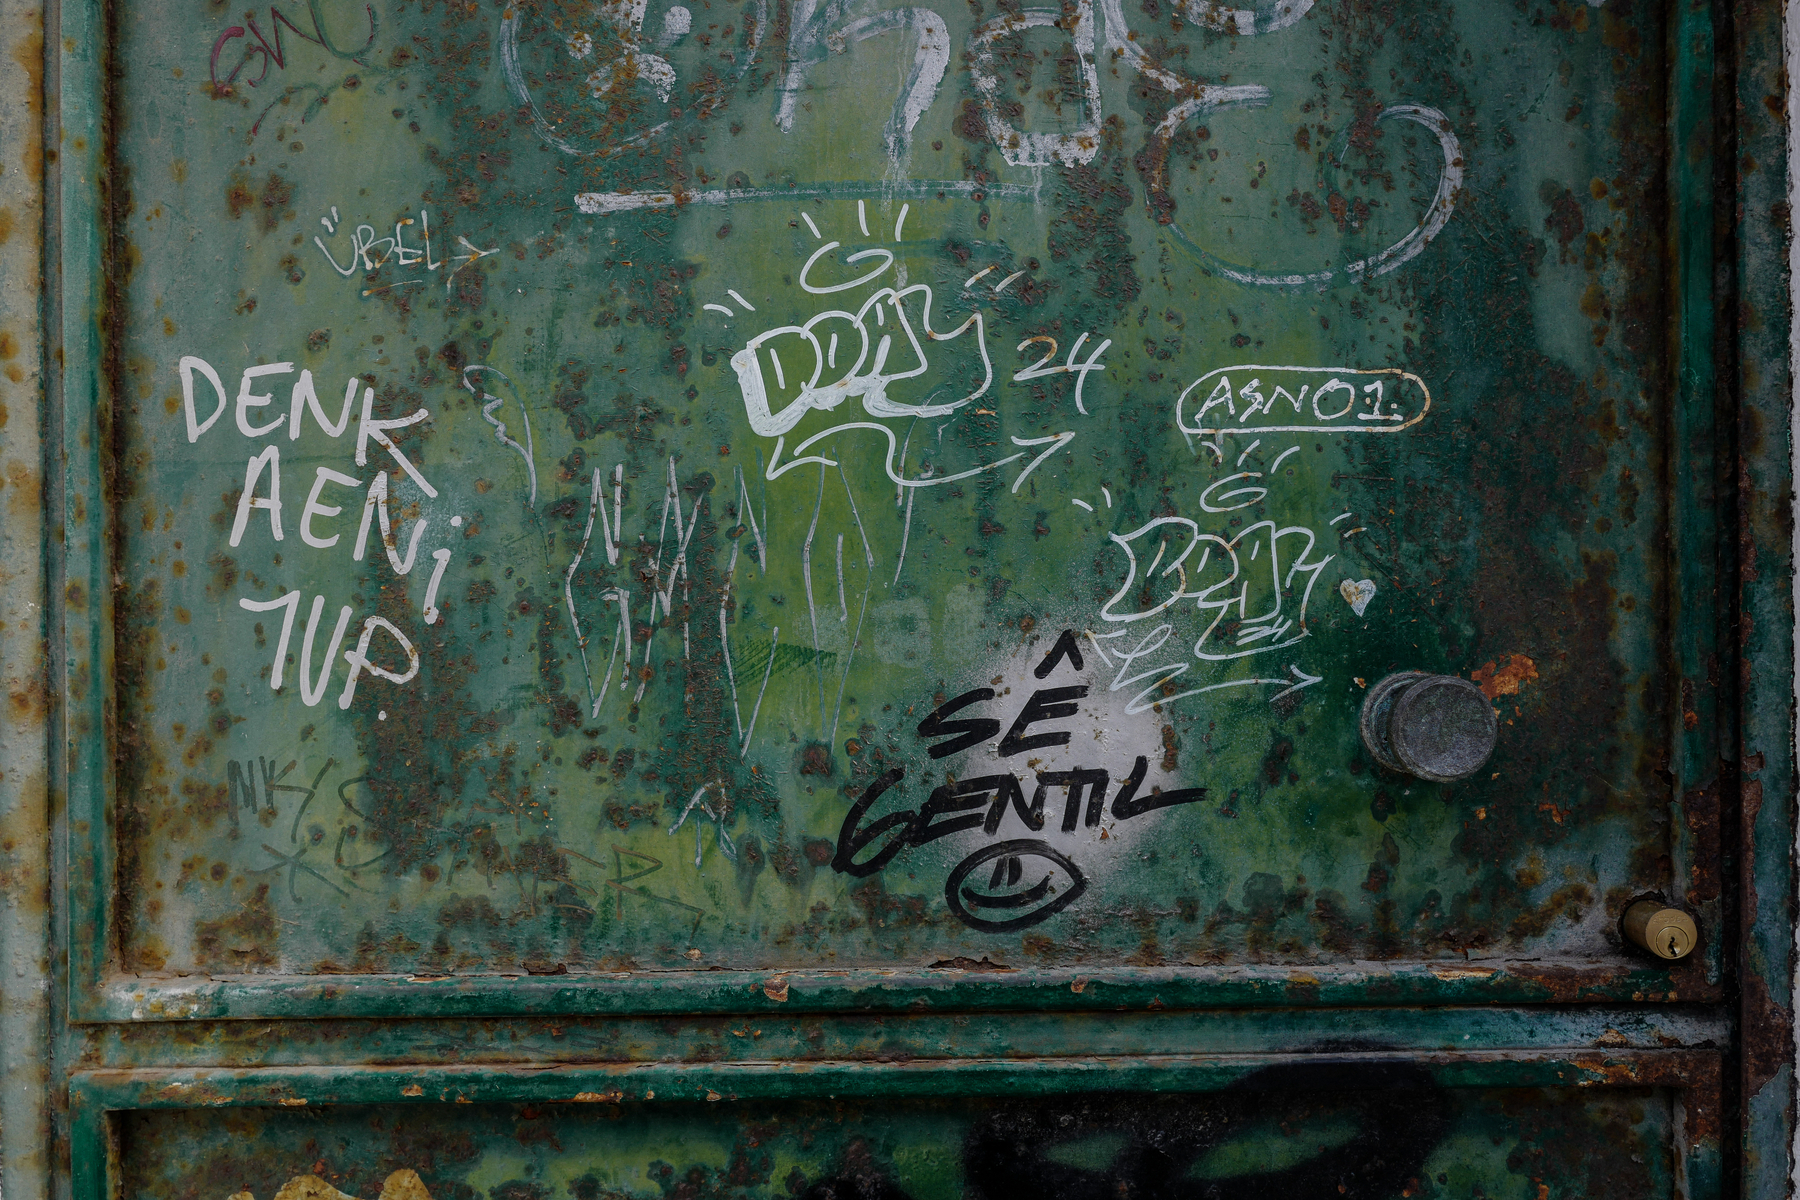 Graffiti tags and scribbles on a weathered and rusting metal surface.